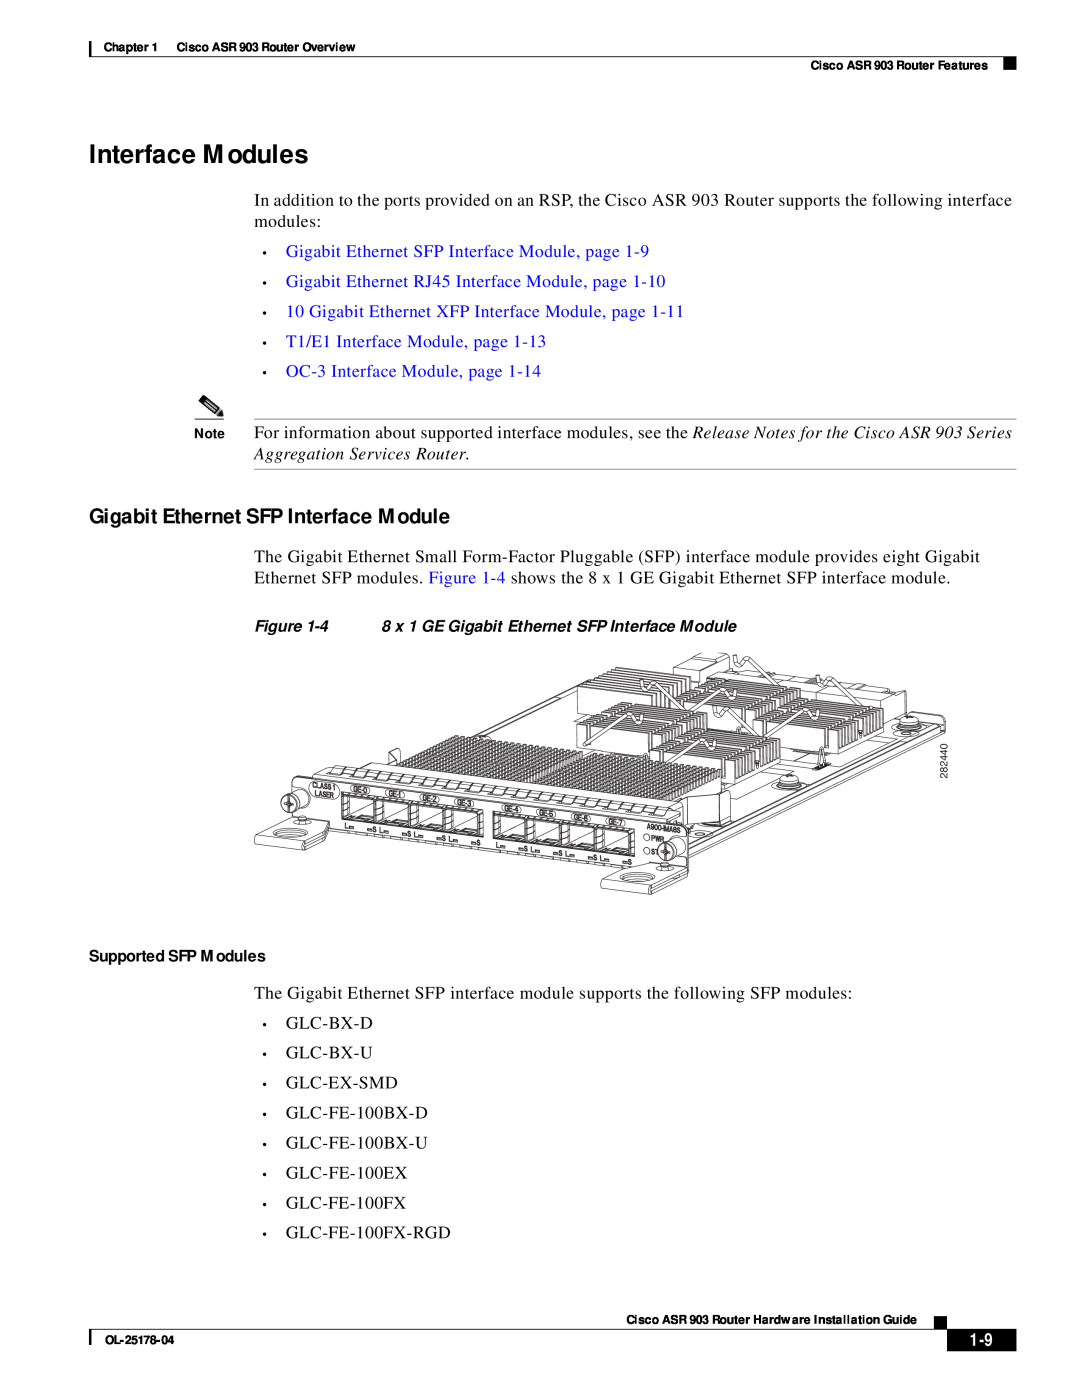 Cisco Systems ASR 903 manual Interface Modules, Gigabit Ethernet SFP Interface Module, Supported SFP Modules 